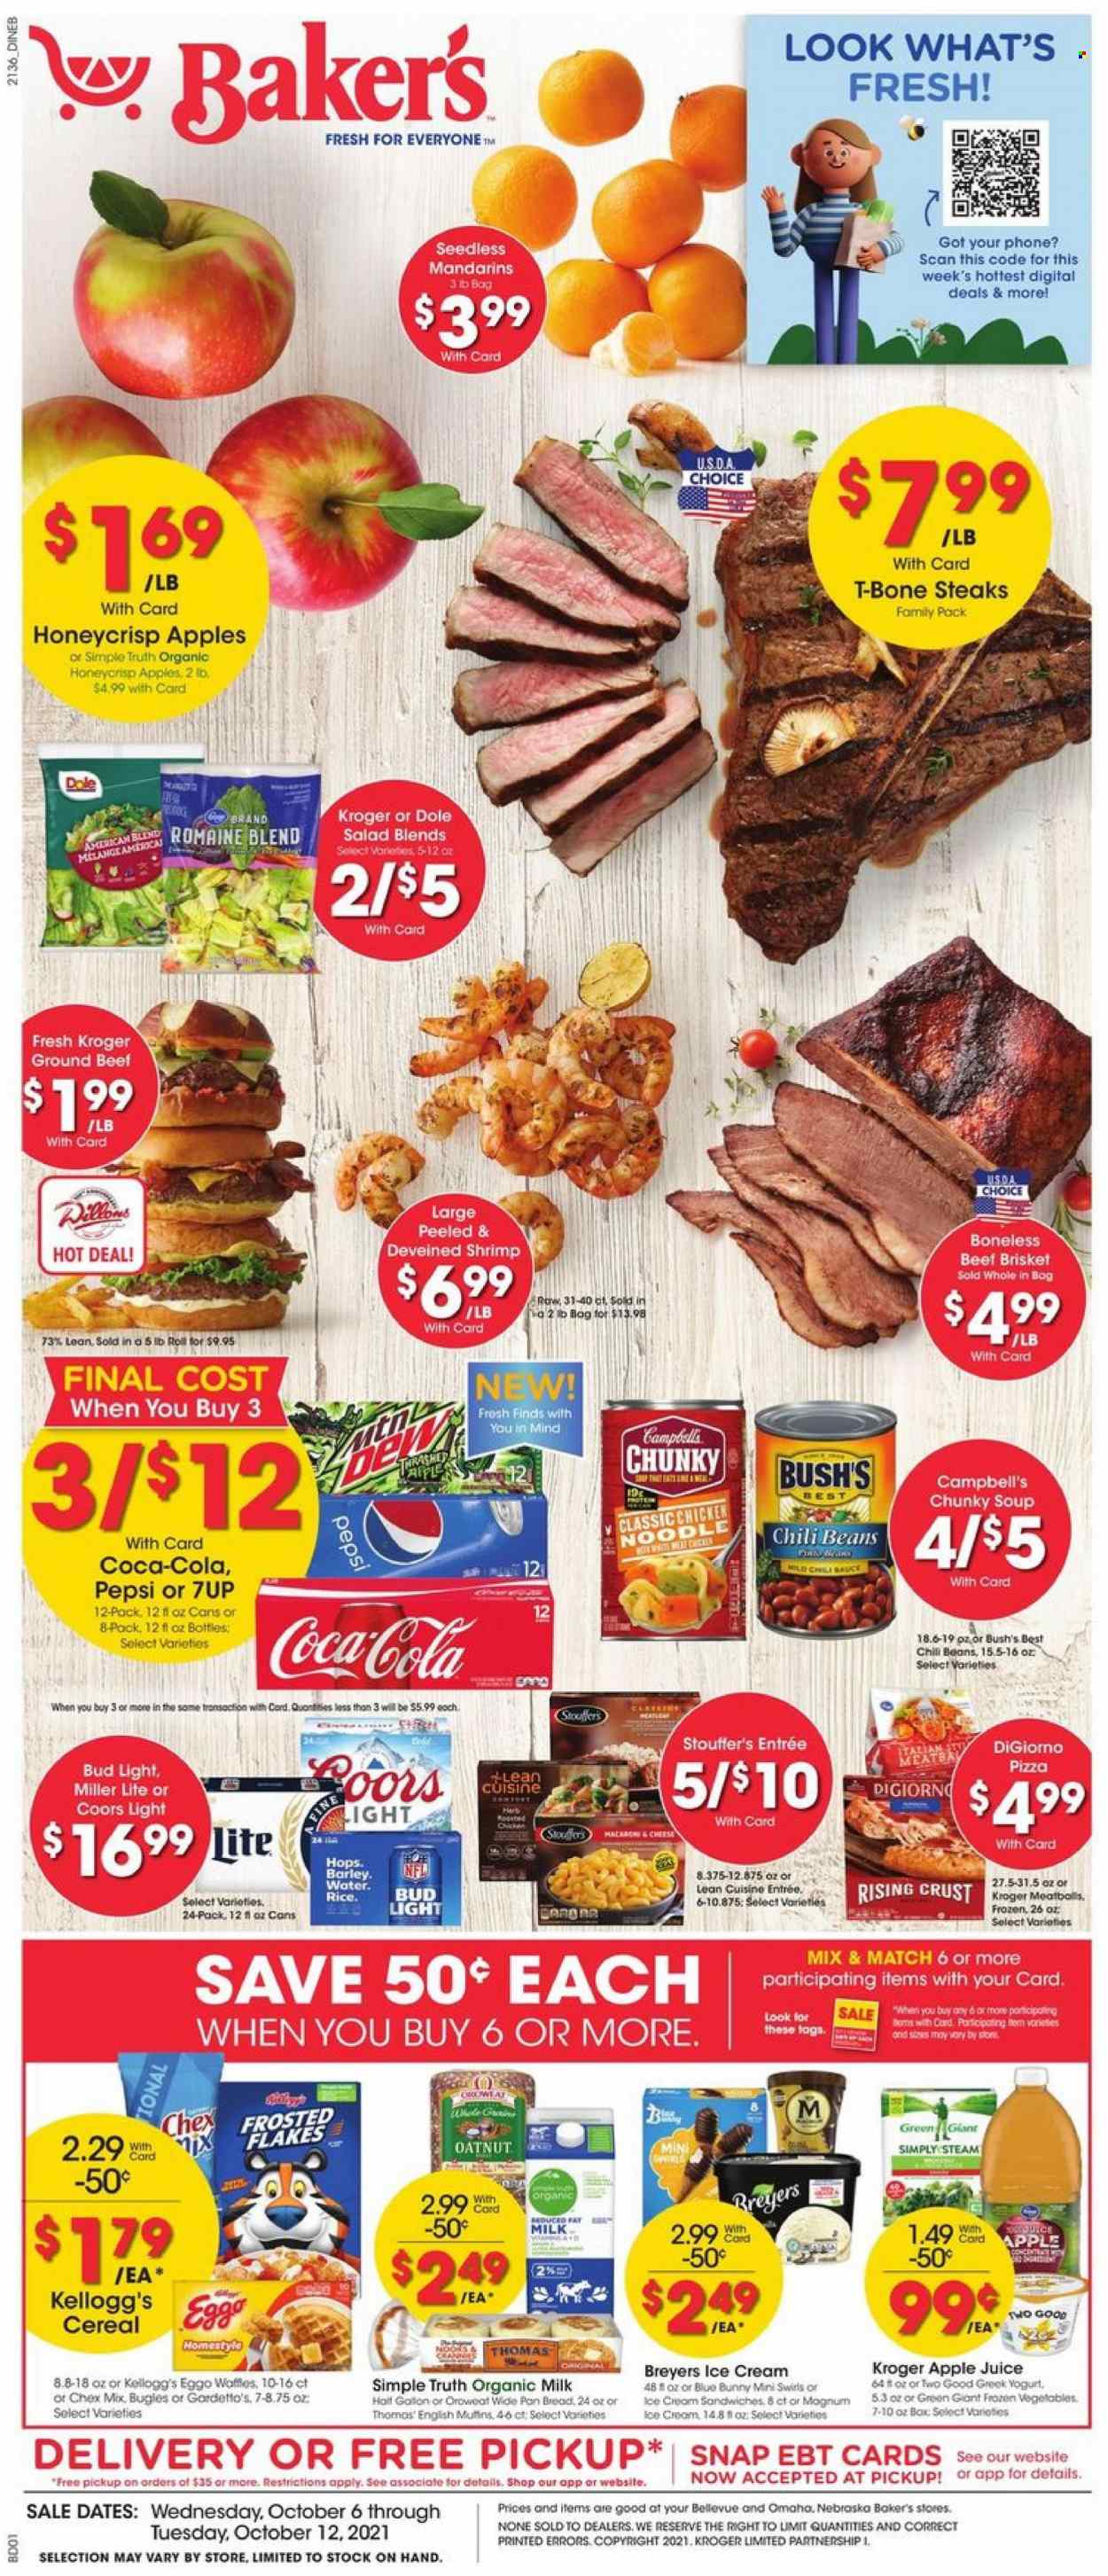 thumbnail - Baker's Flyer - 10/06/2021 - 10/12/2021 - Sales products - waffles, salad, Dole, mandarines, shrimps, Campbell's, pizza, sandwich, soup, noodles, Lean Cuisine, greek yoghurt, yoghurt, organic milk, ice cream, Blue Bunny, Stouffer's, Kellogg's, Chex Mix, chili beans, cereals, Frosted Flakes, apple juice, Coca-Cola, Pepsi, juice, 7UP, beer, Bud Light, beef meat, ground beef, t-bone steak, steak, beef brisket, Miller Lite, Coors. Page 1.